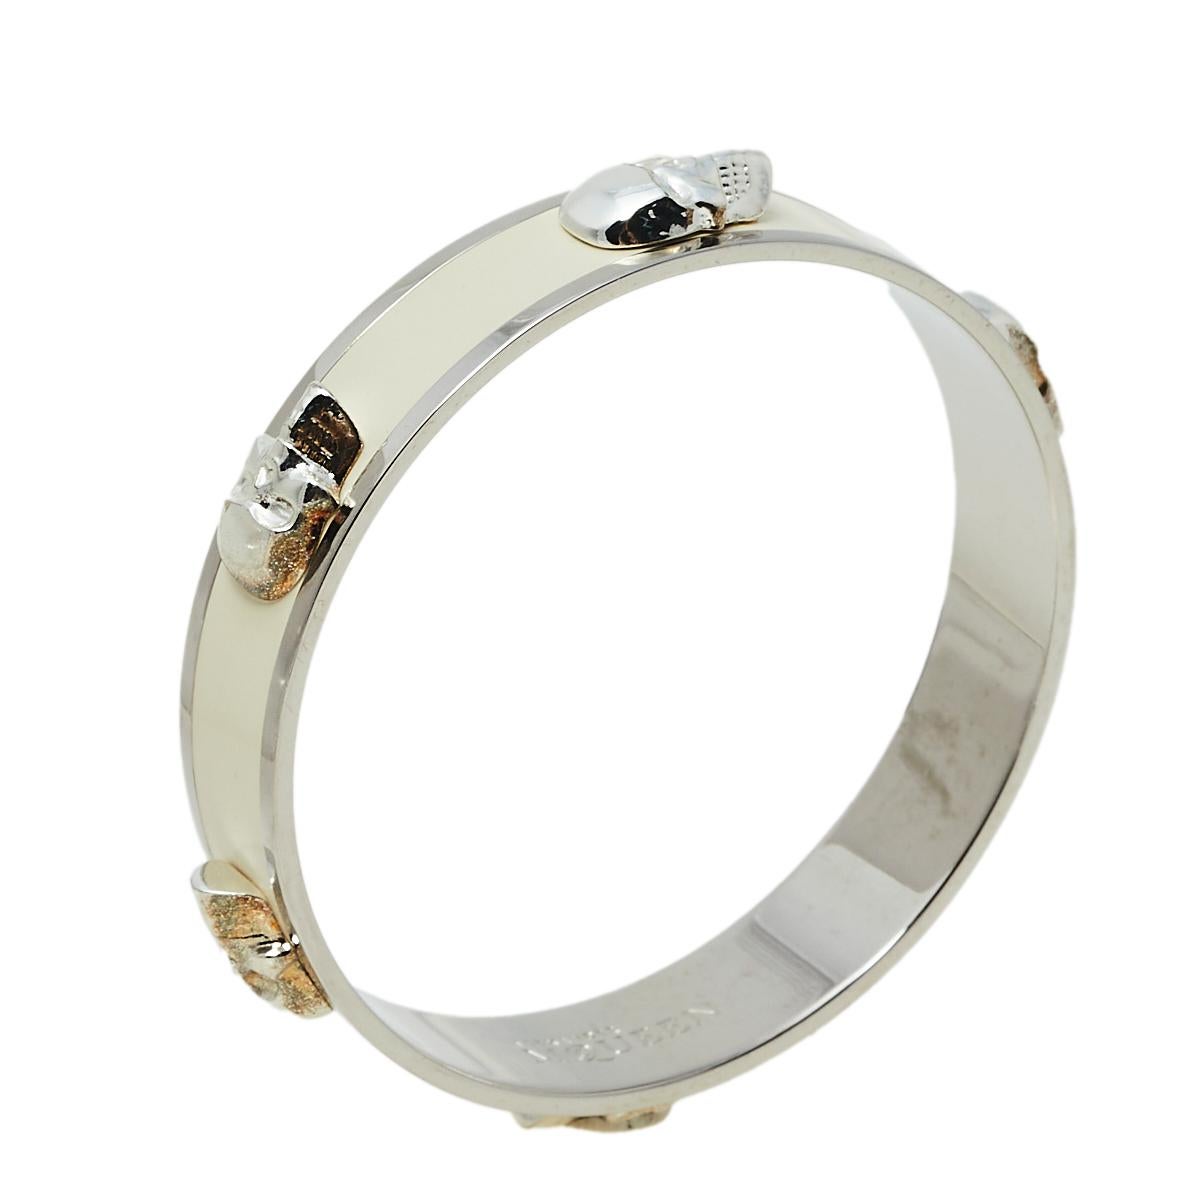 This bangle bracelet by Alexander McQueen holds a bold and distinguished appeal. Crafted from silver-tone metal, it is coated with white enamel all around. The bangle is highlighted with the signature 3D skull detailing.

Includes: Original Box
